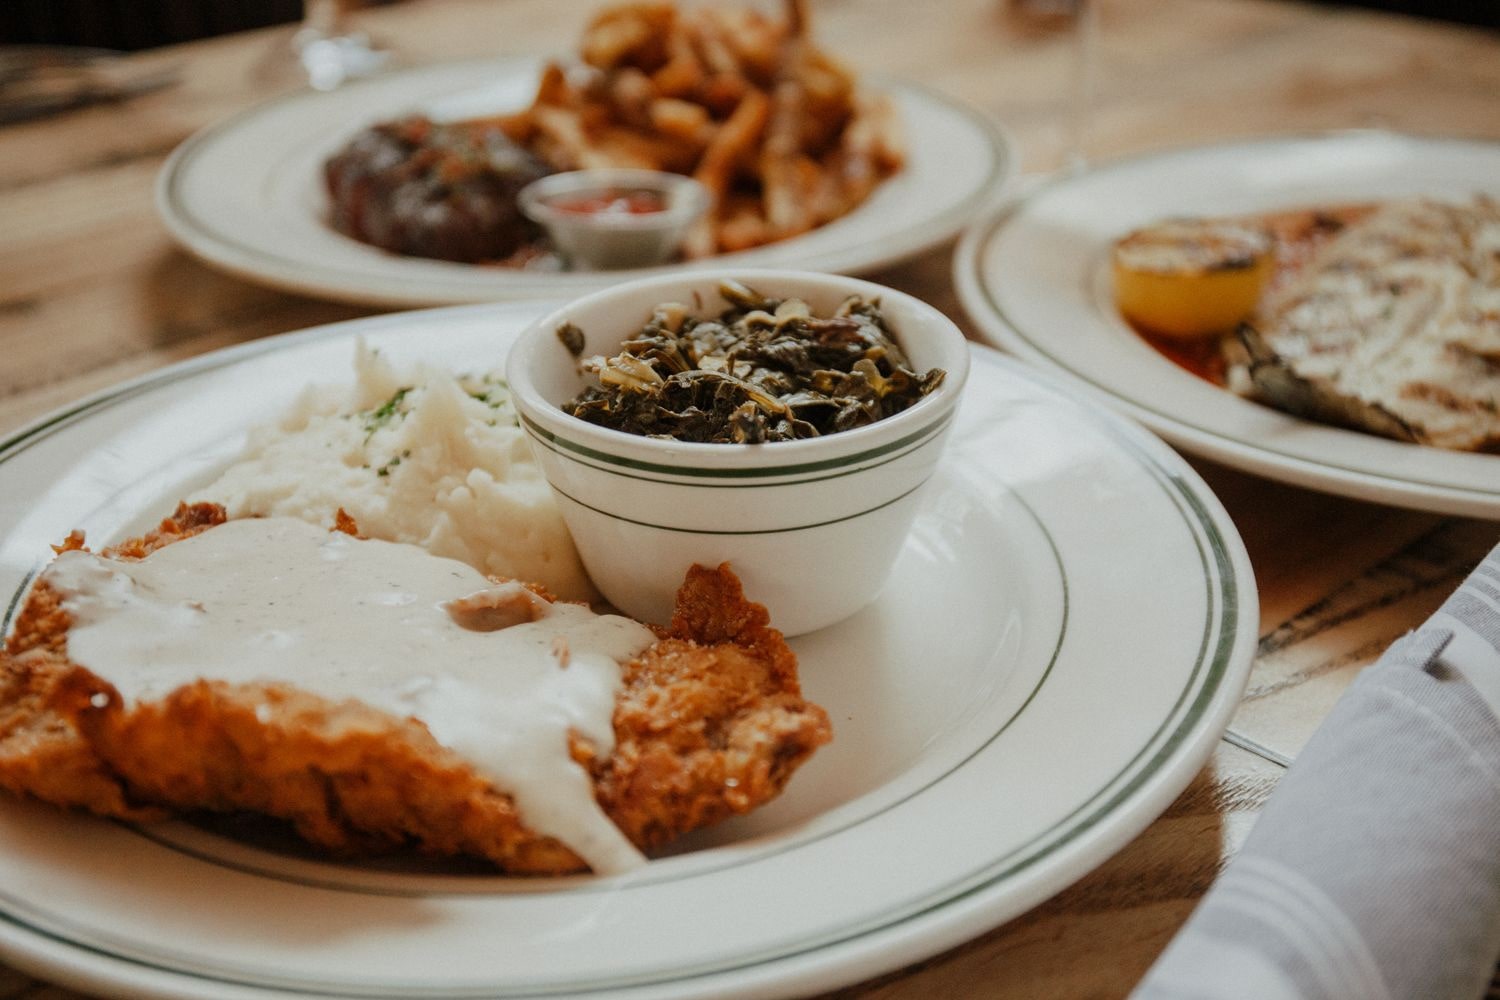 Chicken fried steak and other entrees at Provender Hall